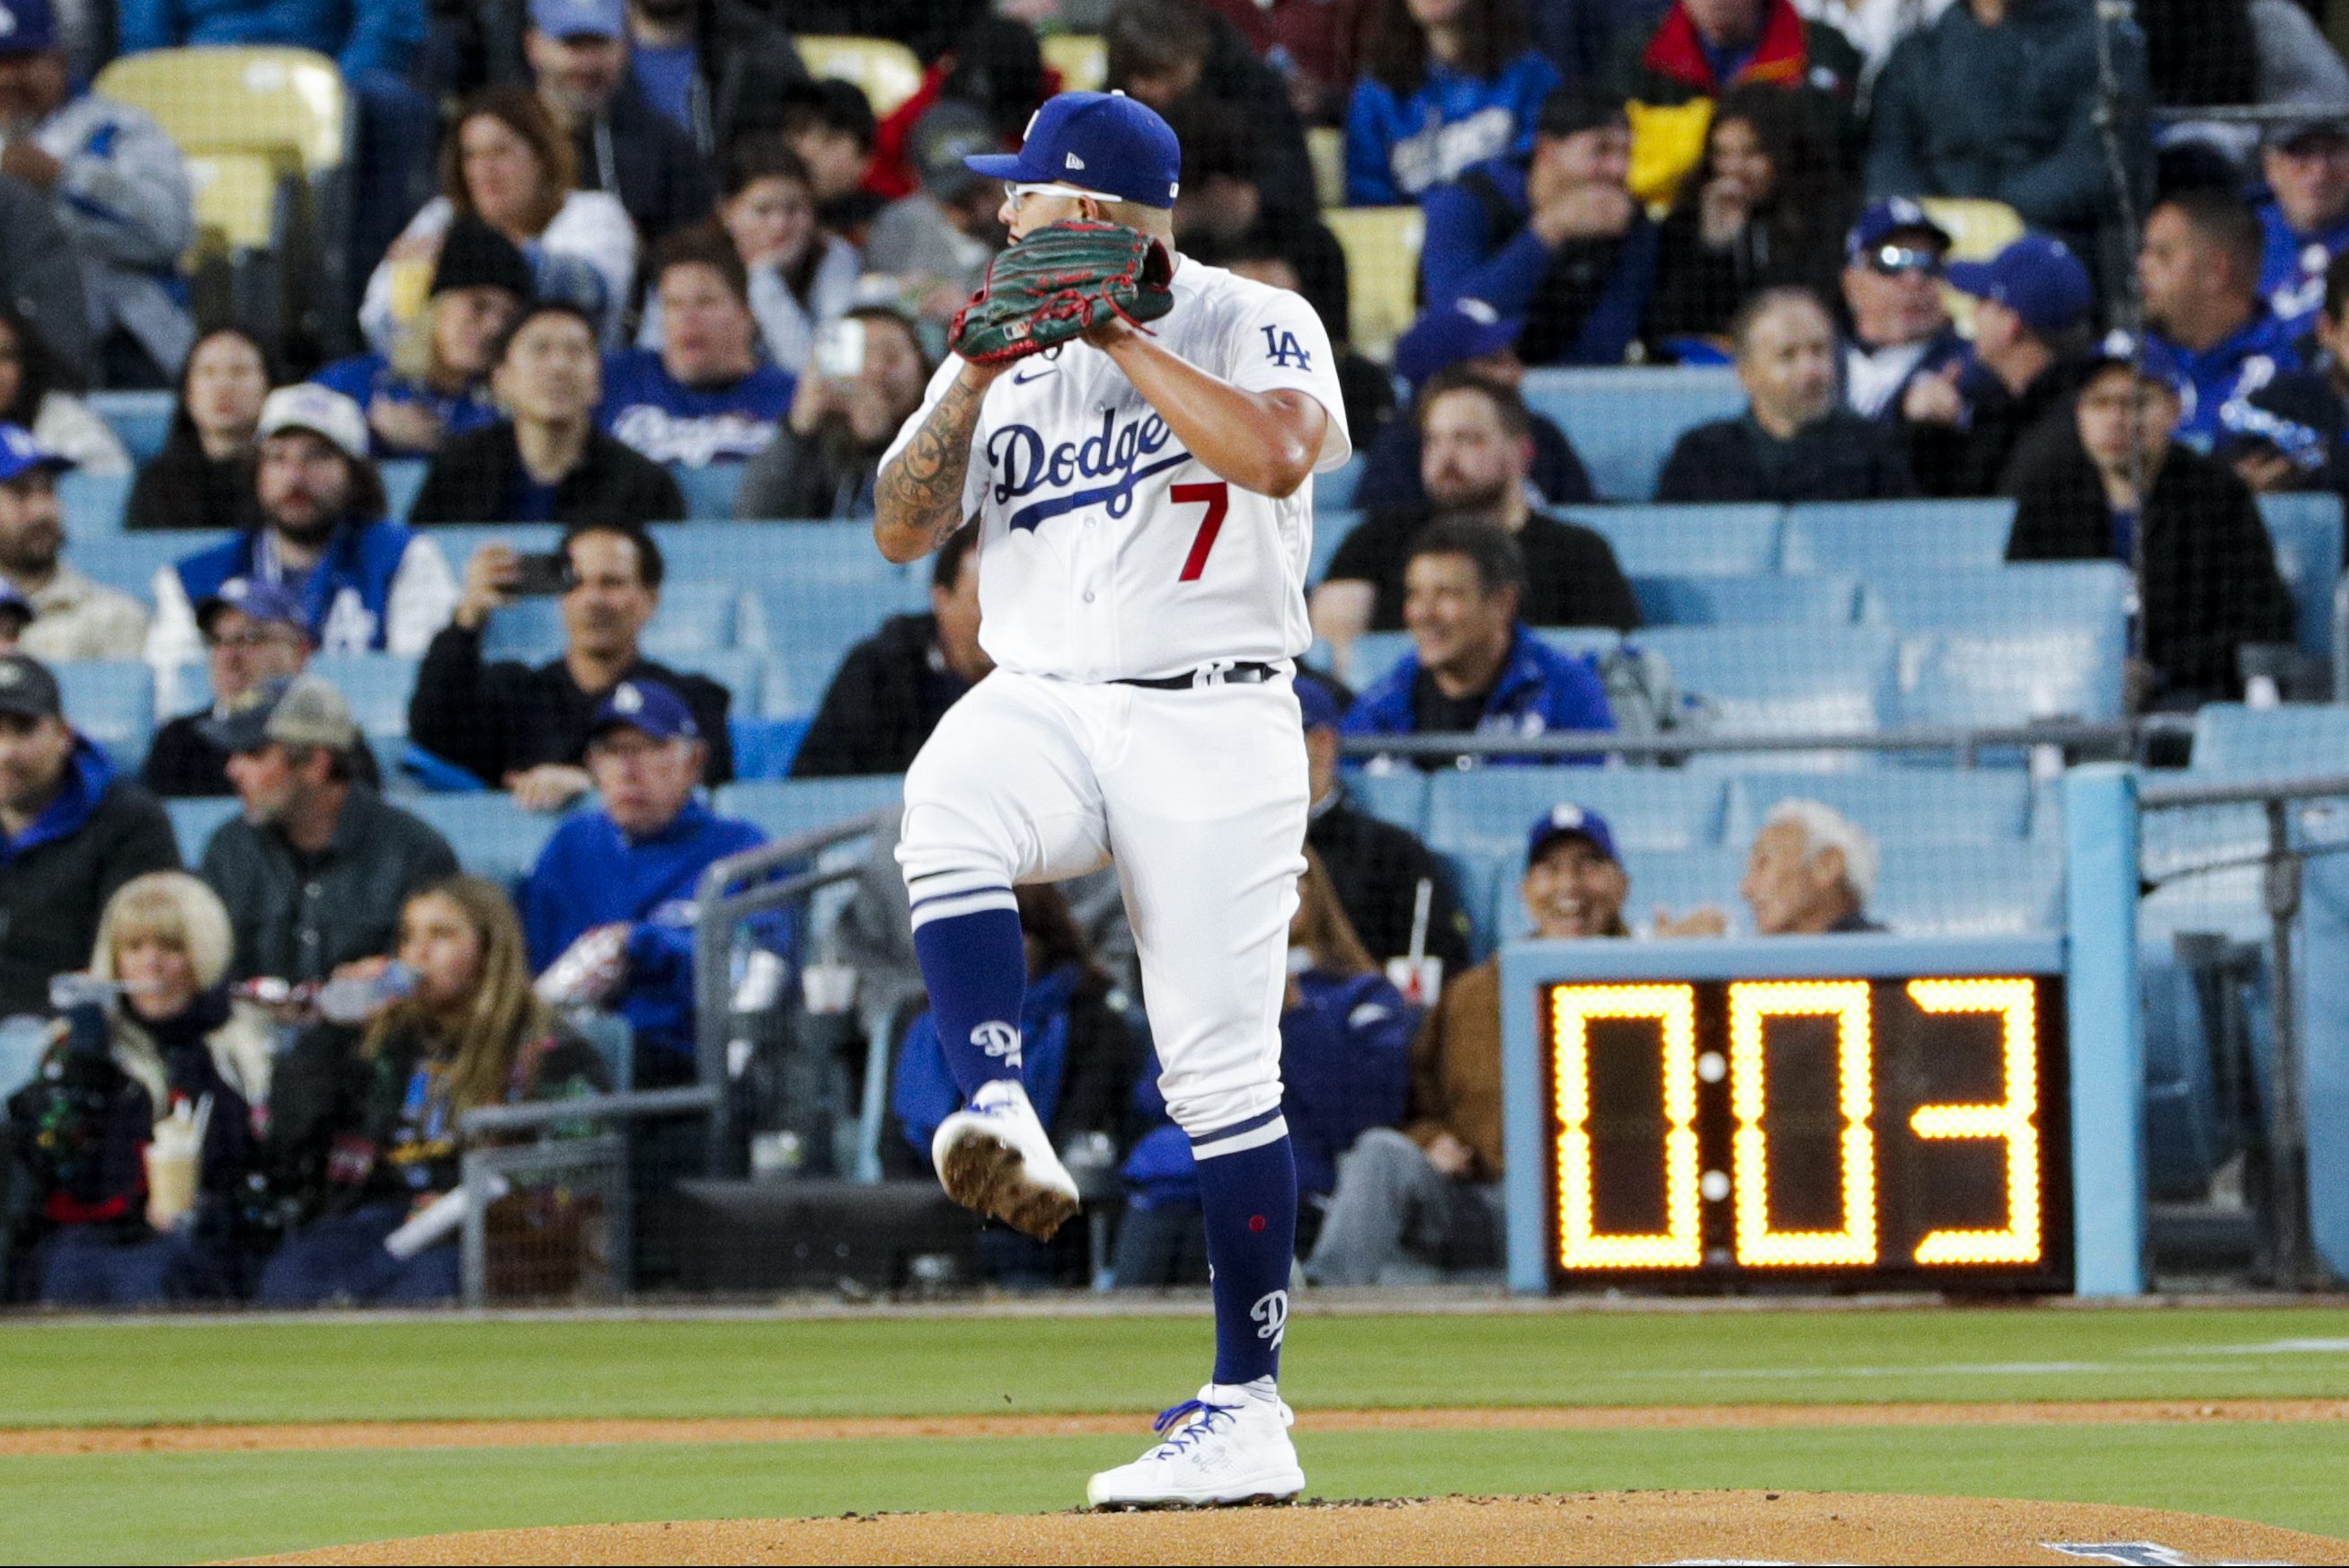 MLB Rule Changes Spur Record Opening Day MLB.TV Viewership